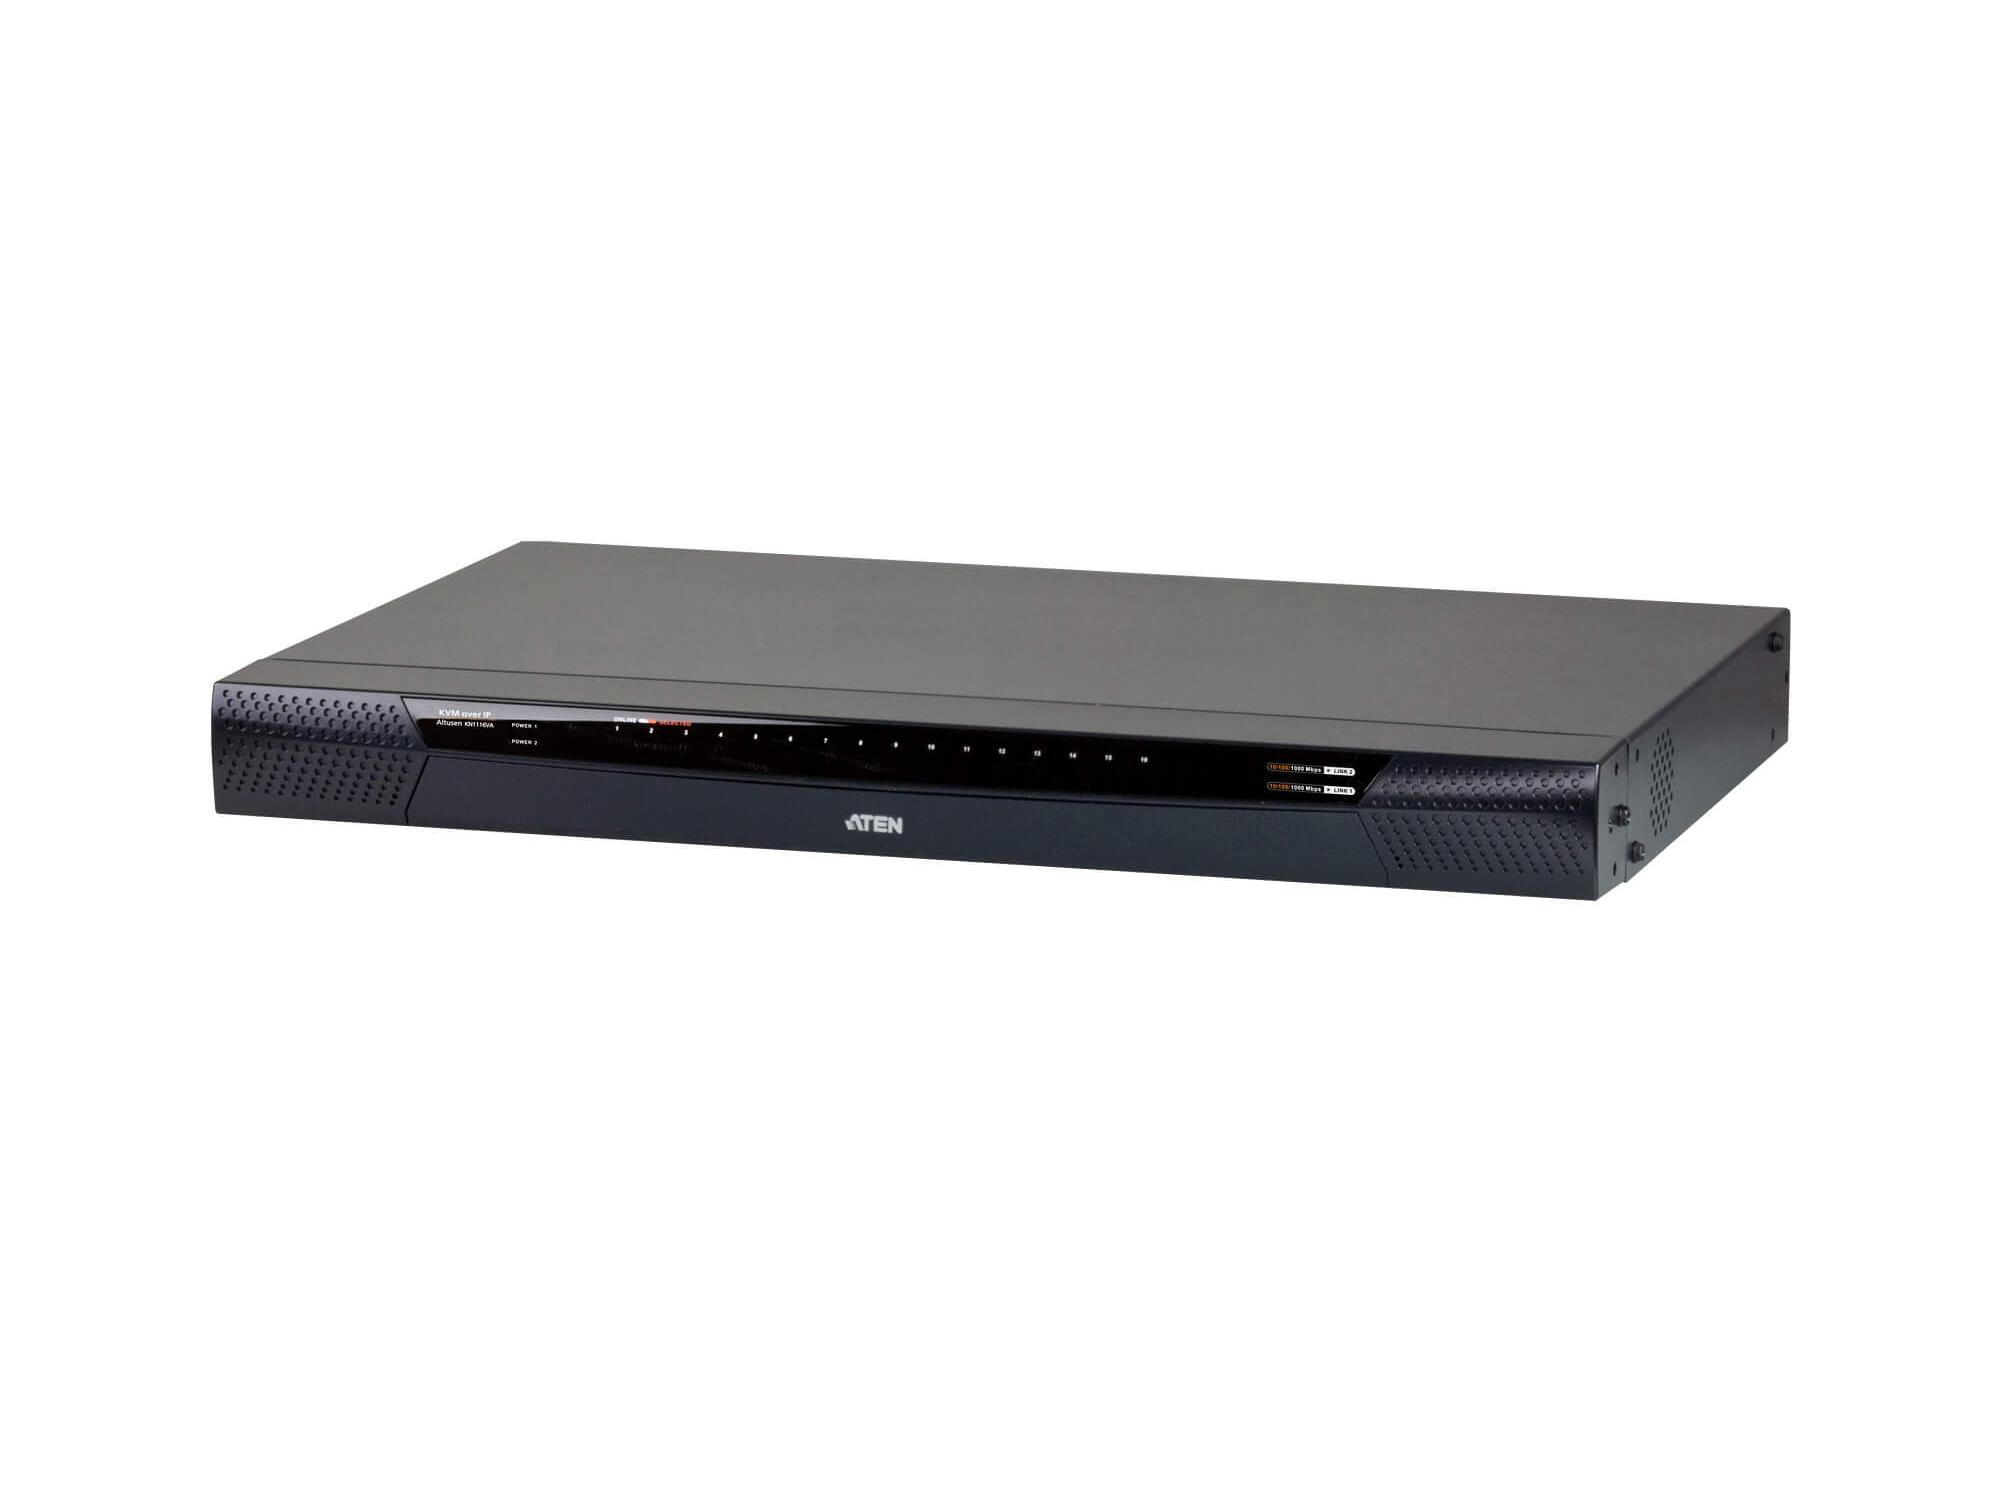 KN1116VA 1-Local/1-Remote Access 16-Port Cat 5 KVM over IP Switch with Virtual Media (1920x1200) by Aten